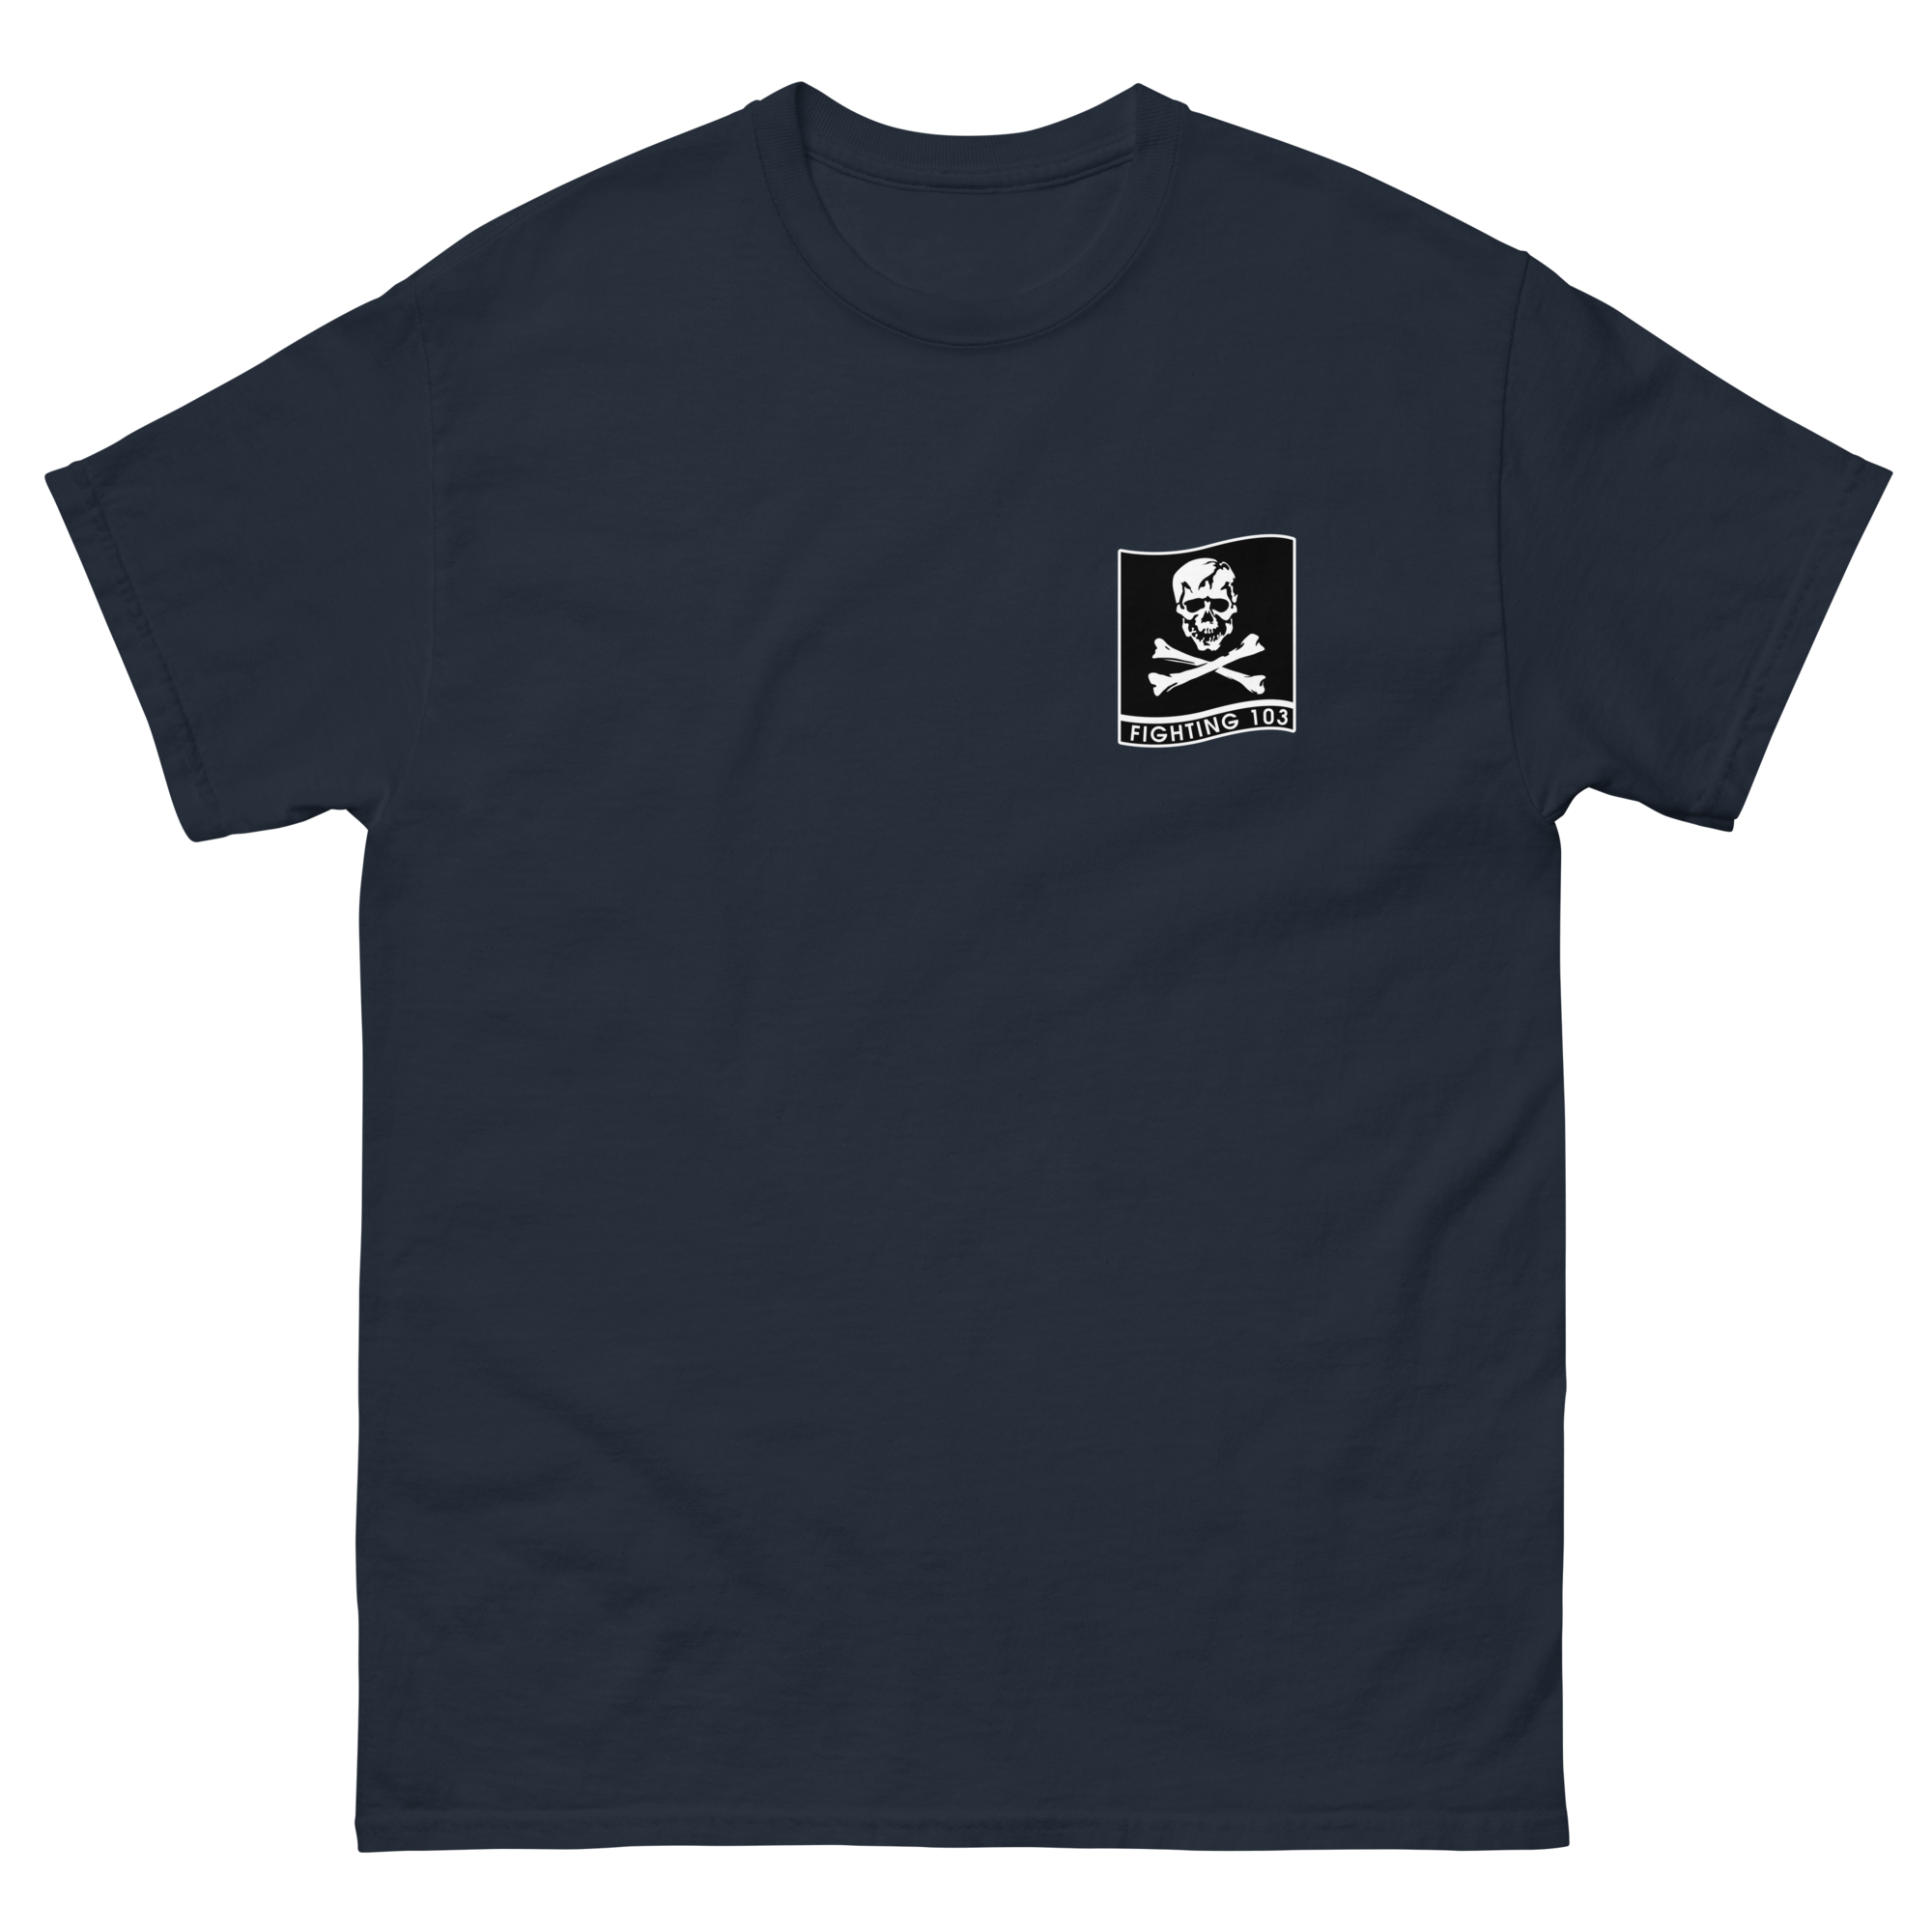 VF/VFA-103 Jolly Rogers Squadron Crest T-Shirt